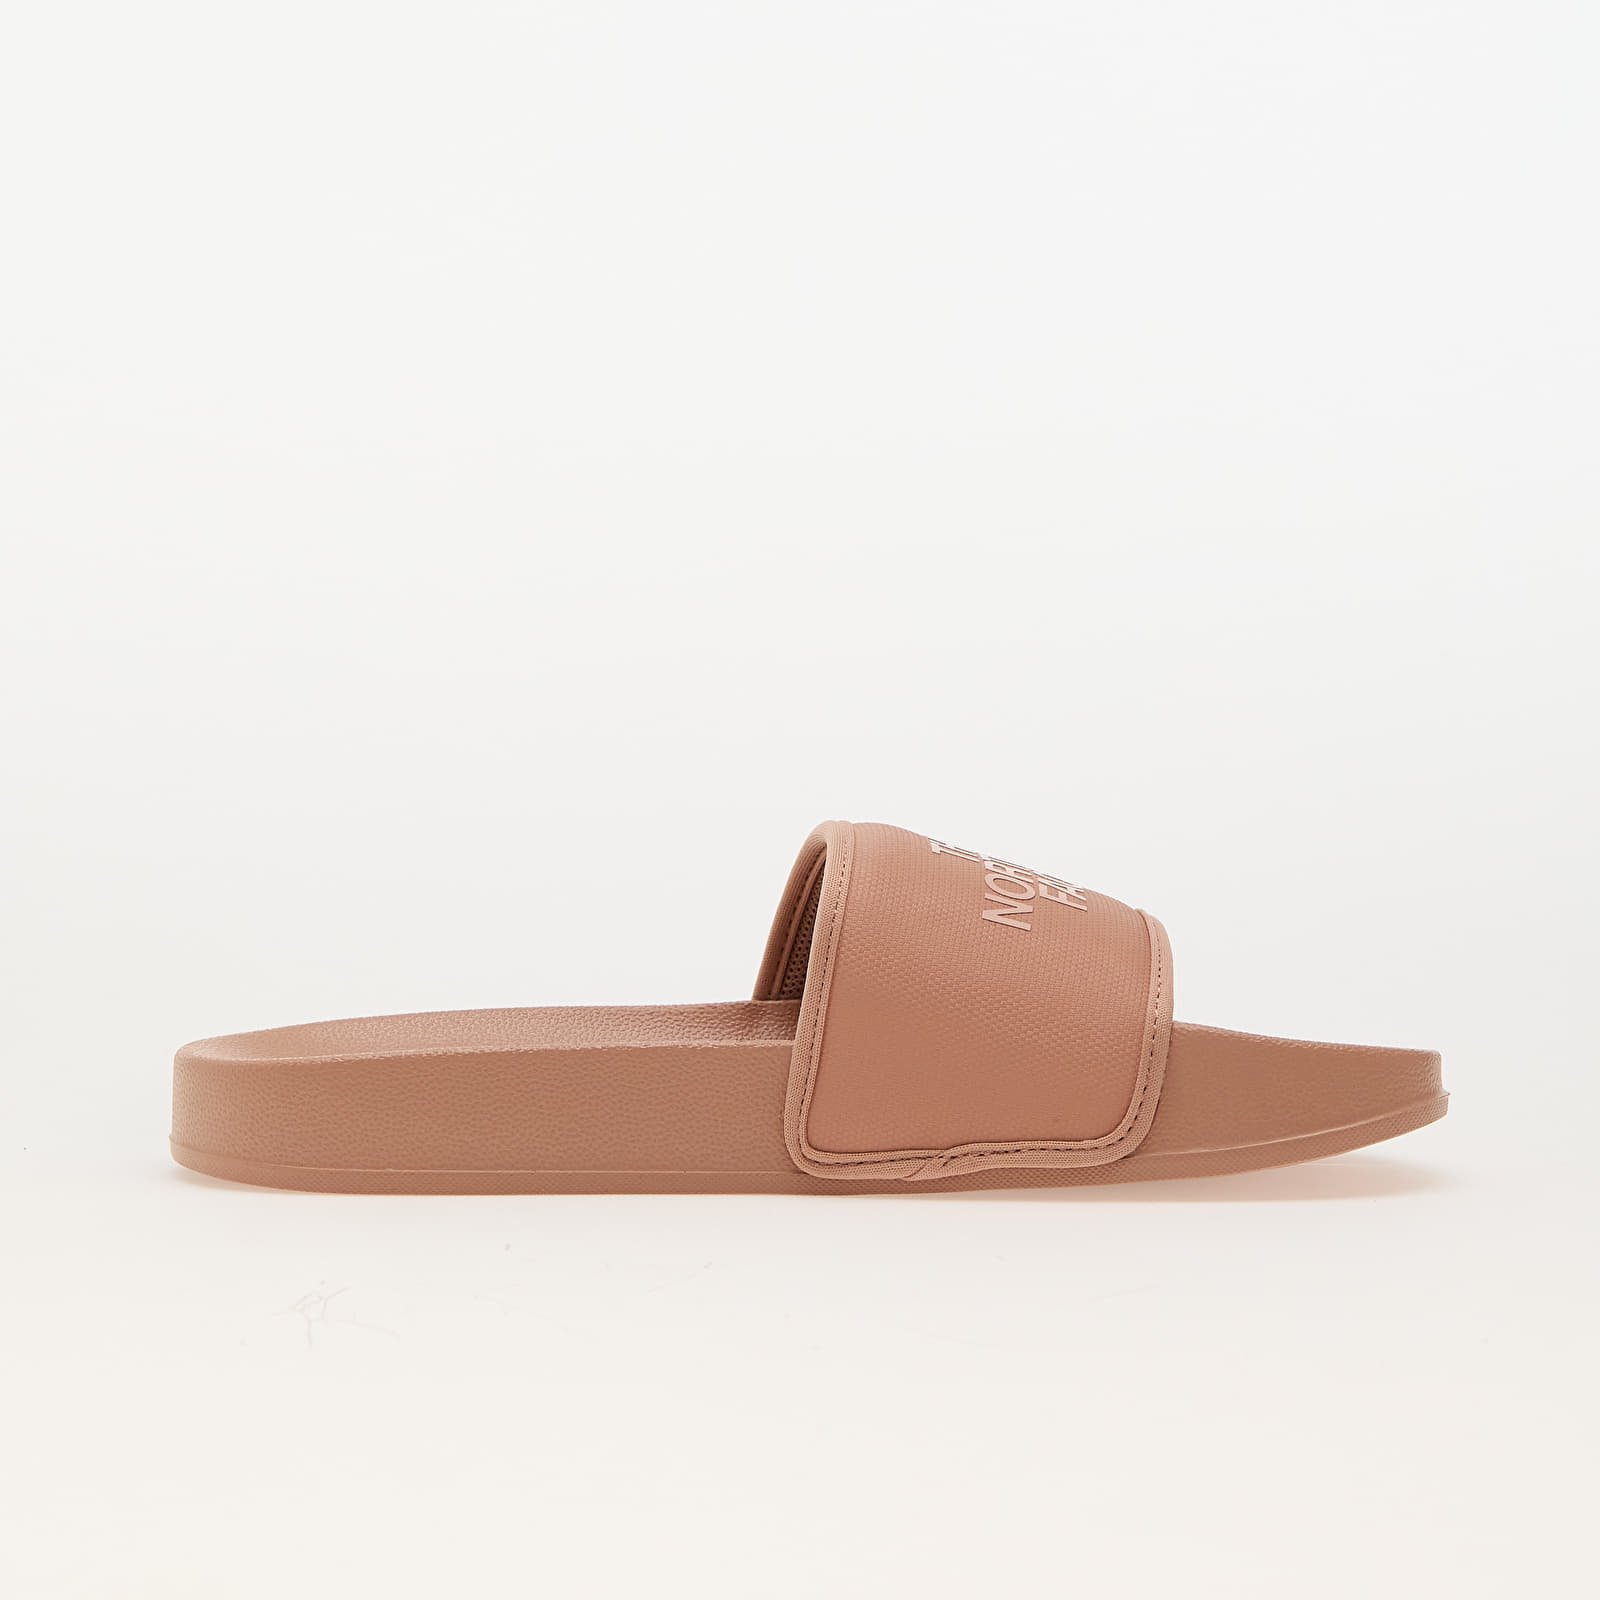 Women's Base Camp Slide in Cream/Pink, Size UK 3 | END. Clothing